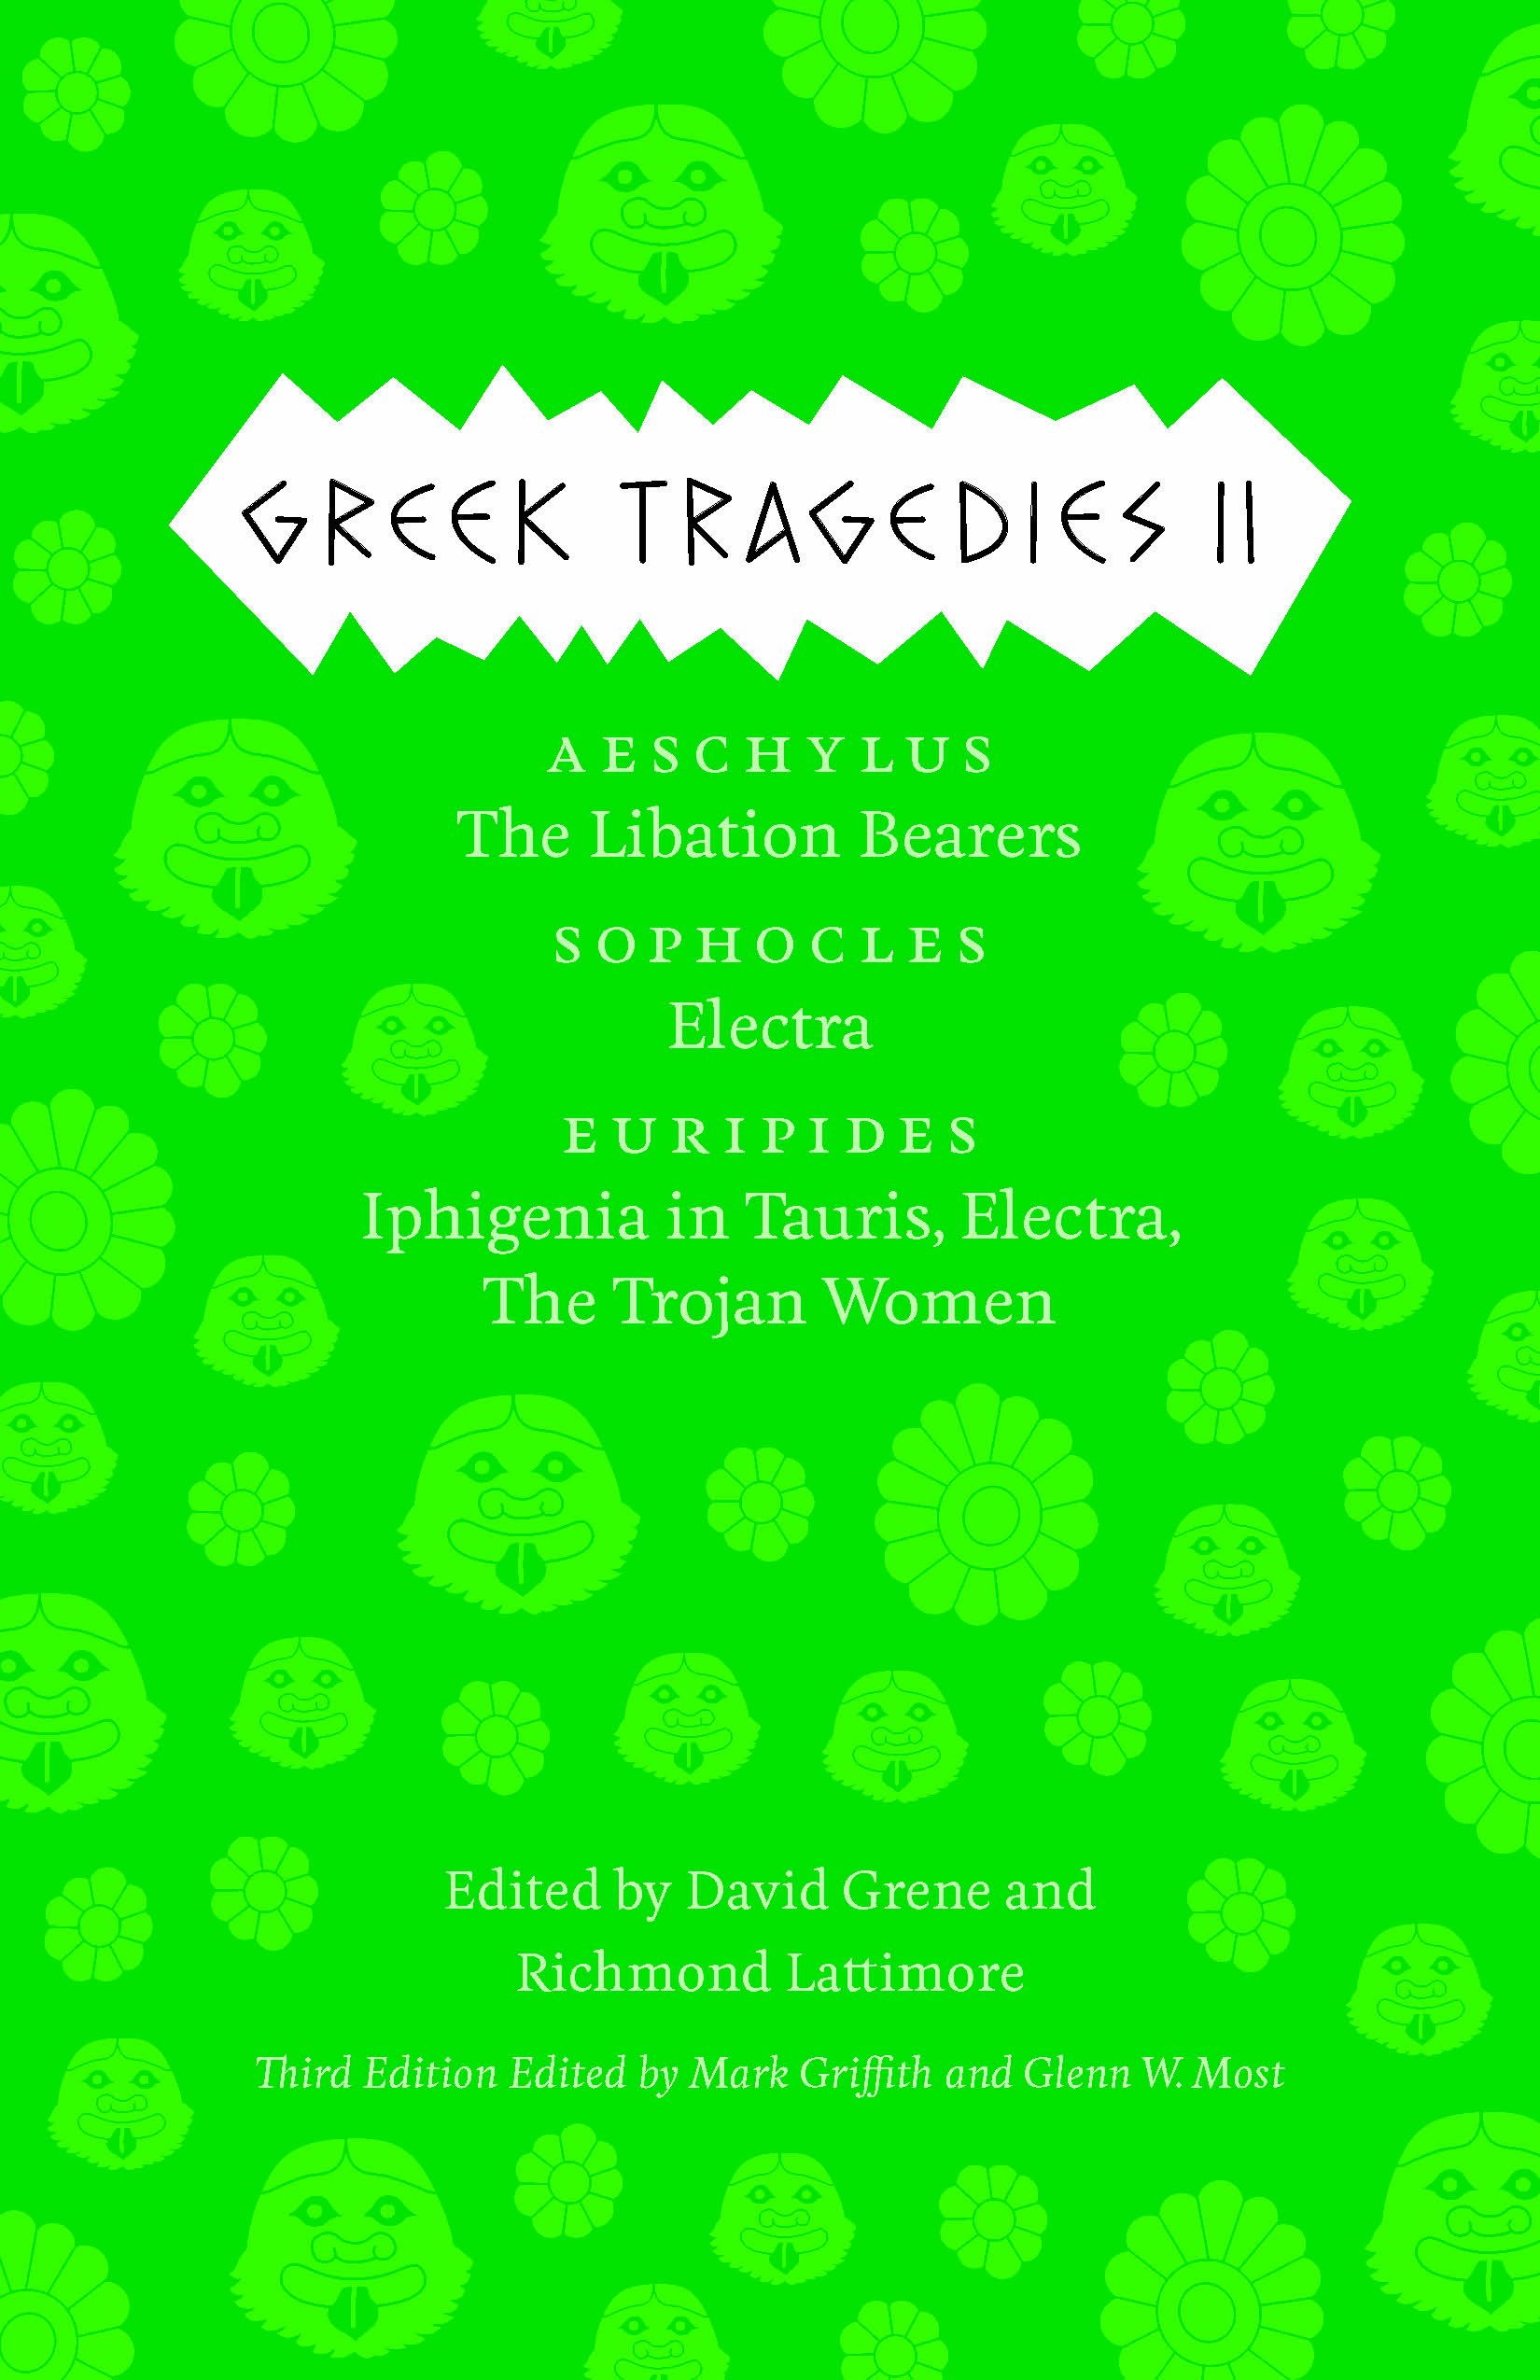 Book Cover Greek Tragedies 2: Aeschylus: The Libation Bearers; Sophocles: Electra; Euripides: Iphigenia among the Taurians, Electra, The Trojan Women (Volume 2)